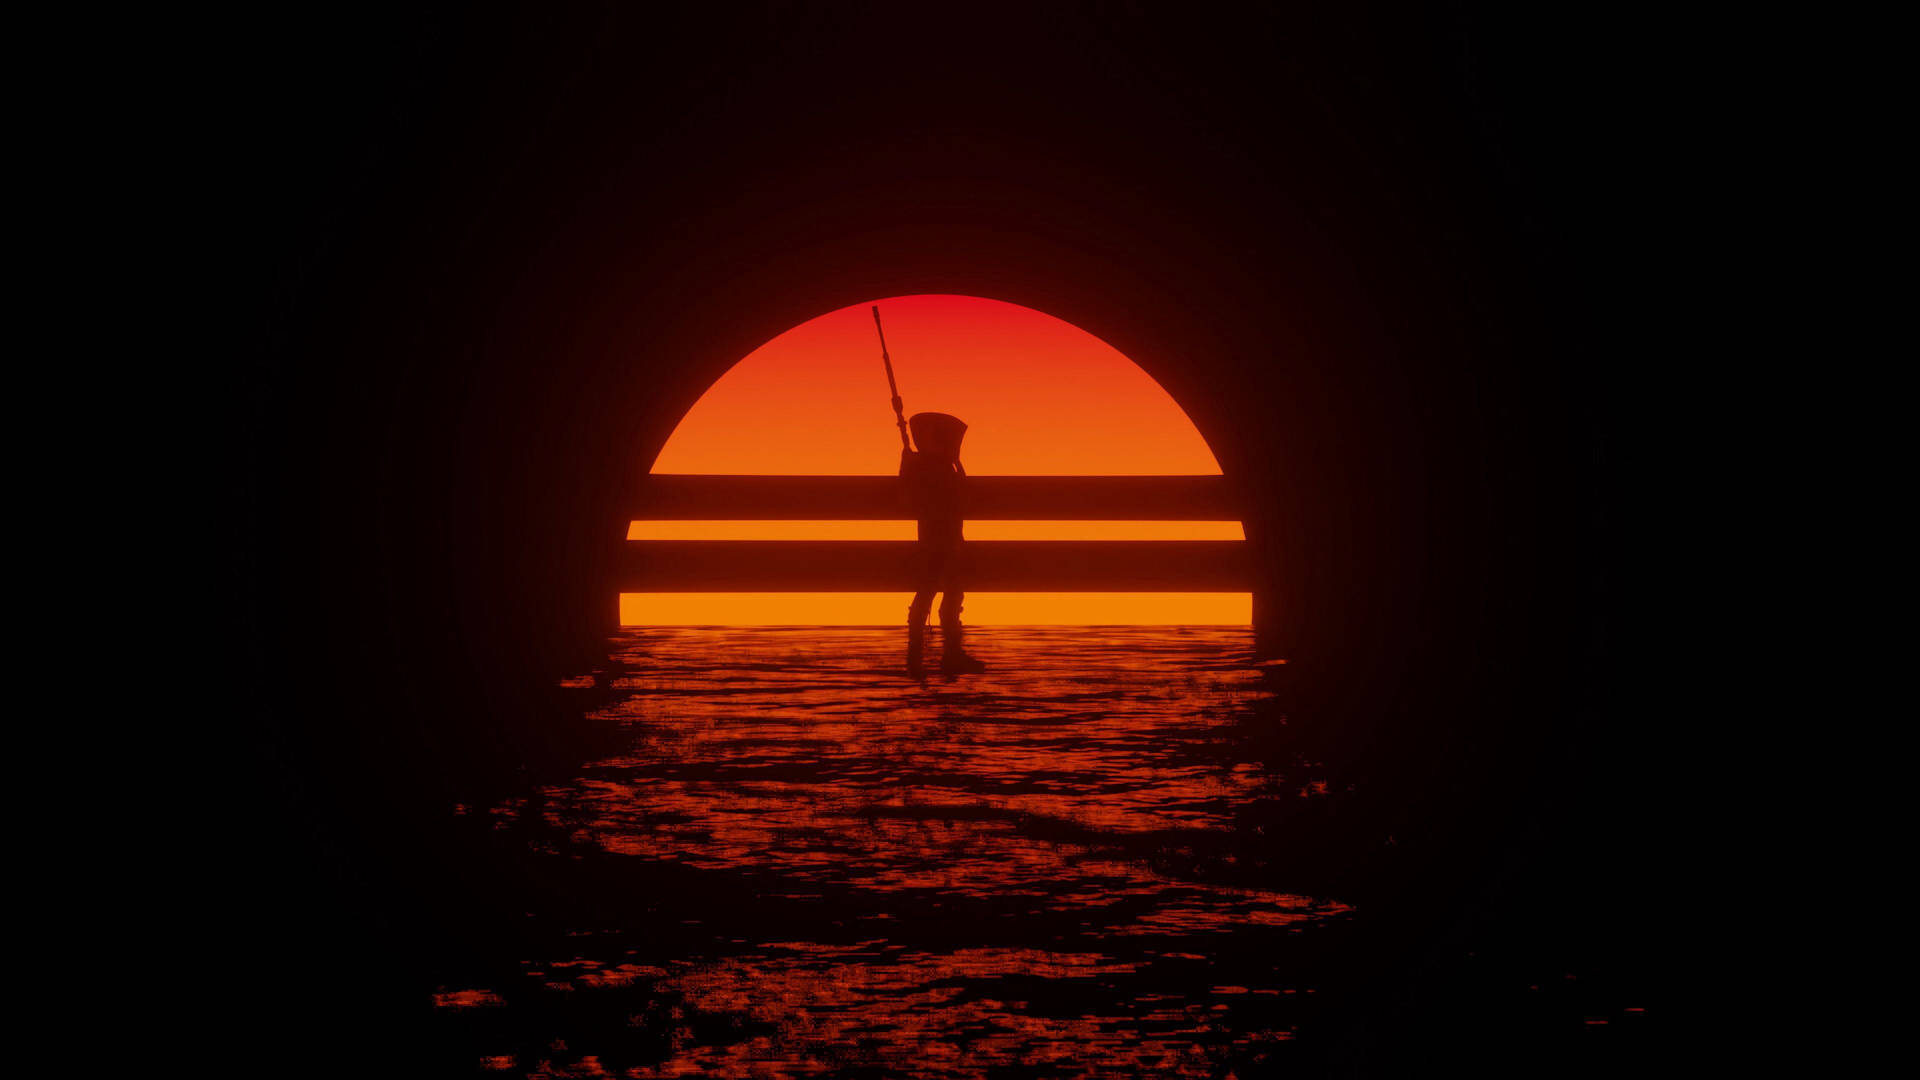 Sunset Retrowave With Boy Shadow